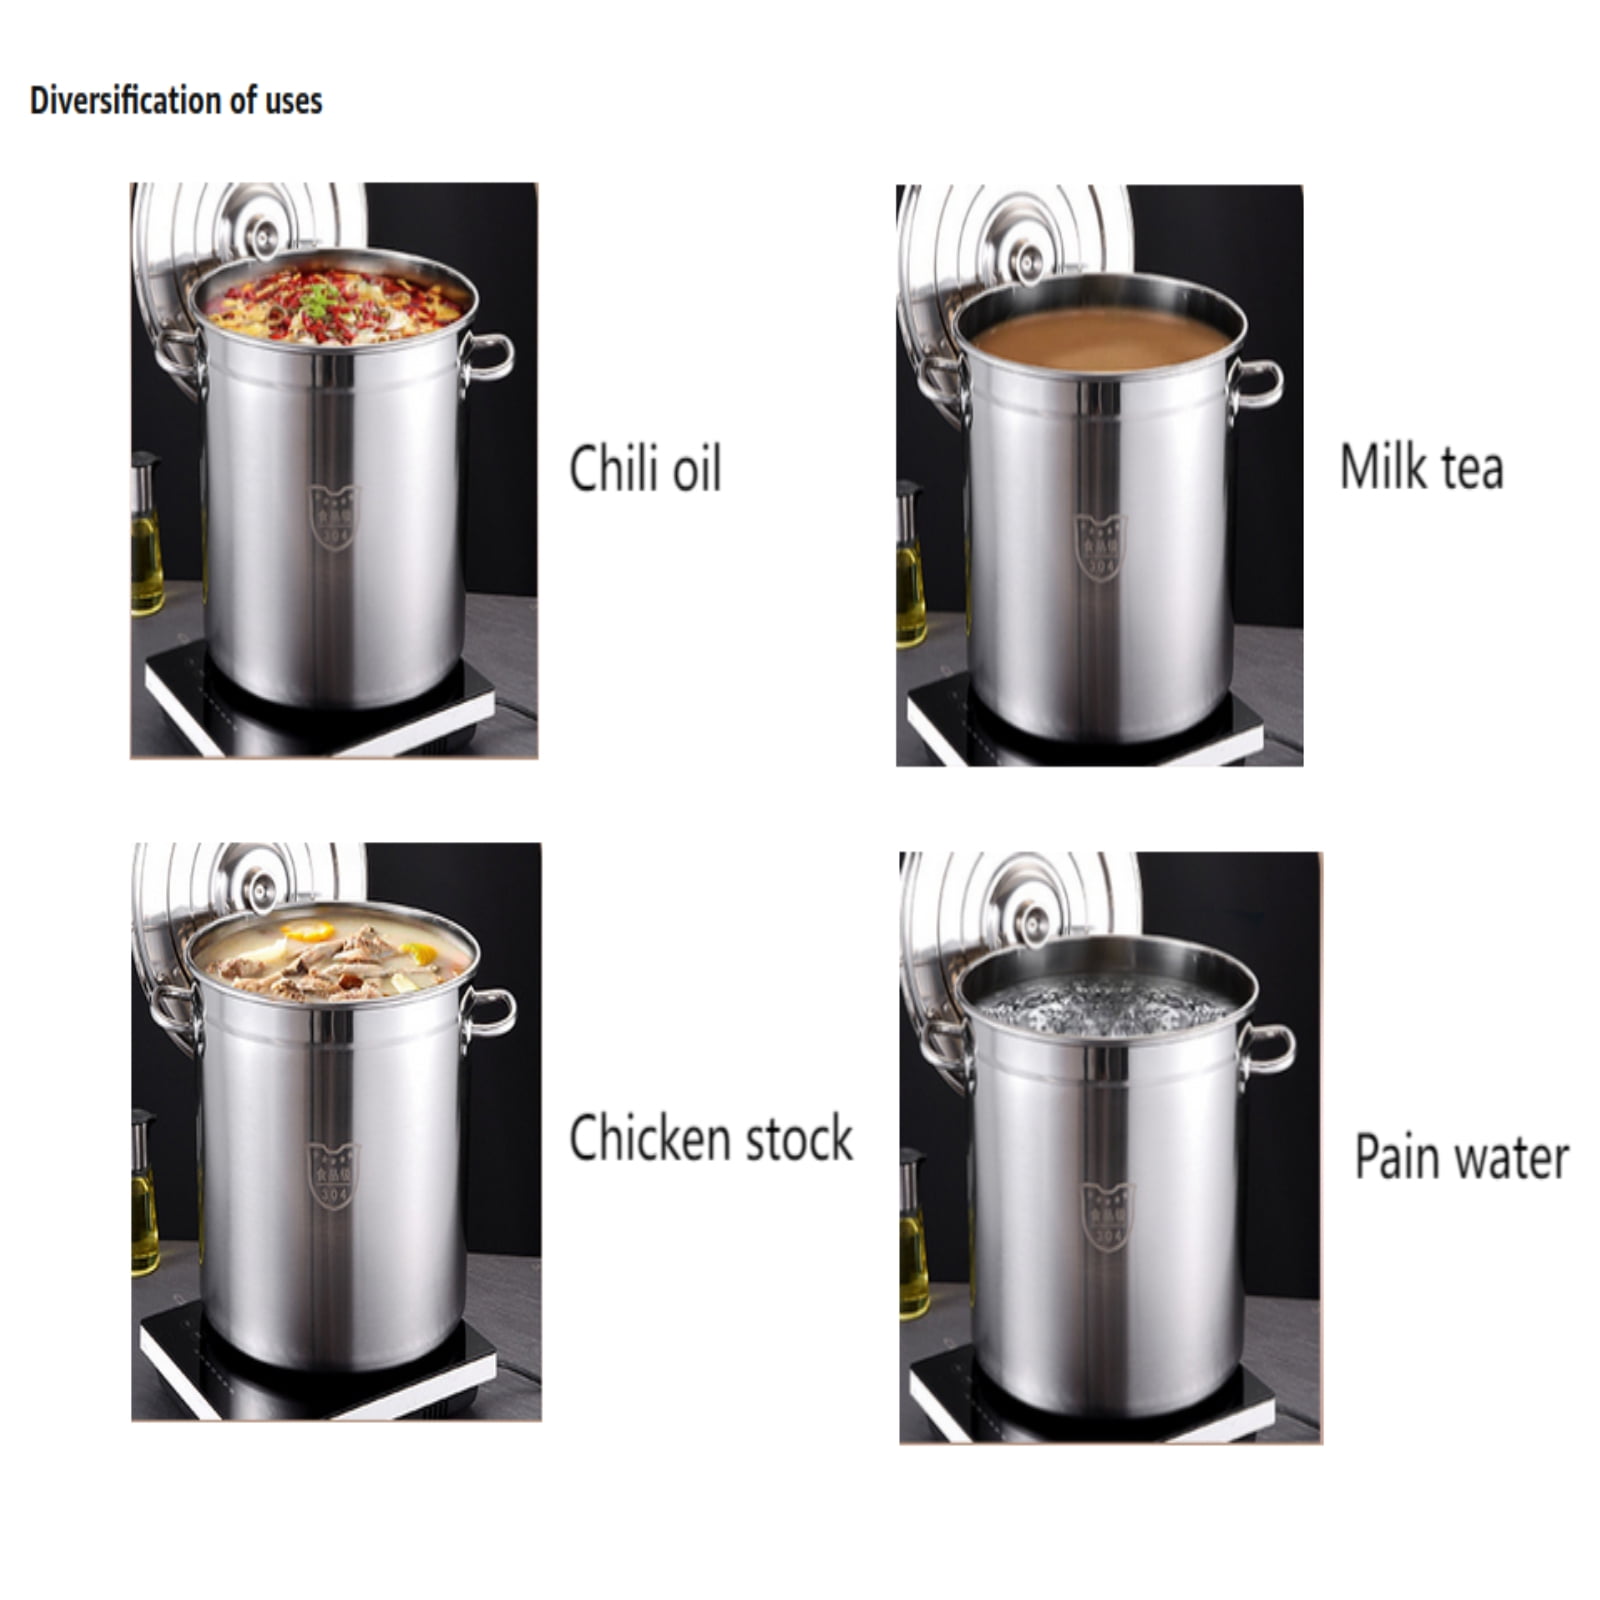  LIANYU 12QT 18/10 Stainless Steel Stock Pot with Lid, Large  Soup Pot, Big Cookware, 12 Quart Canning Pasta Pot with Measuring Mark,  Tall Cooking Pot, Induction Pot for Boiling Strew Simmer